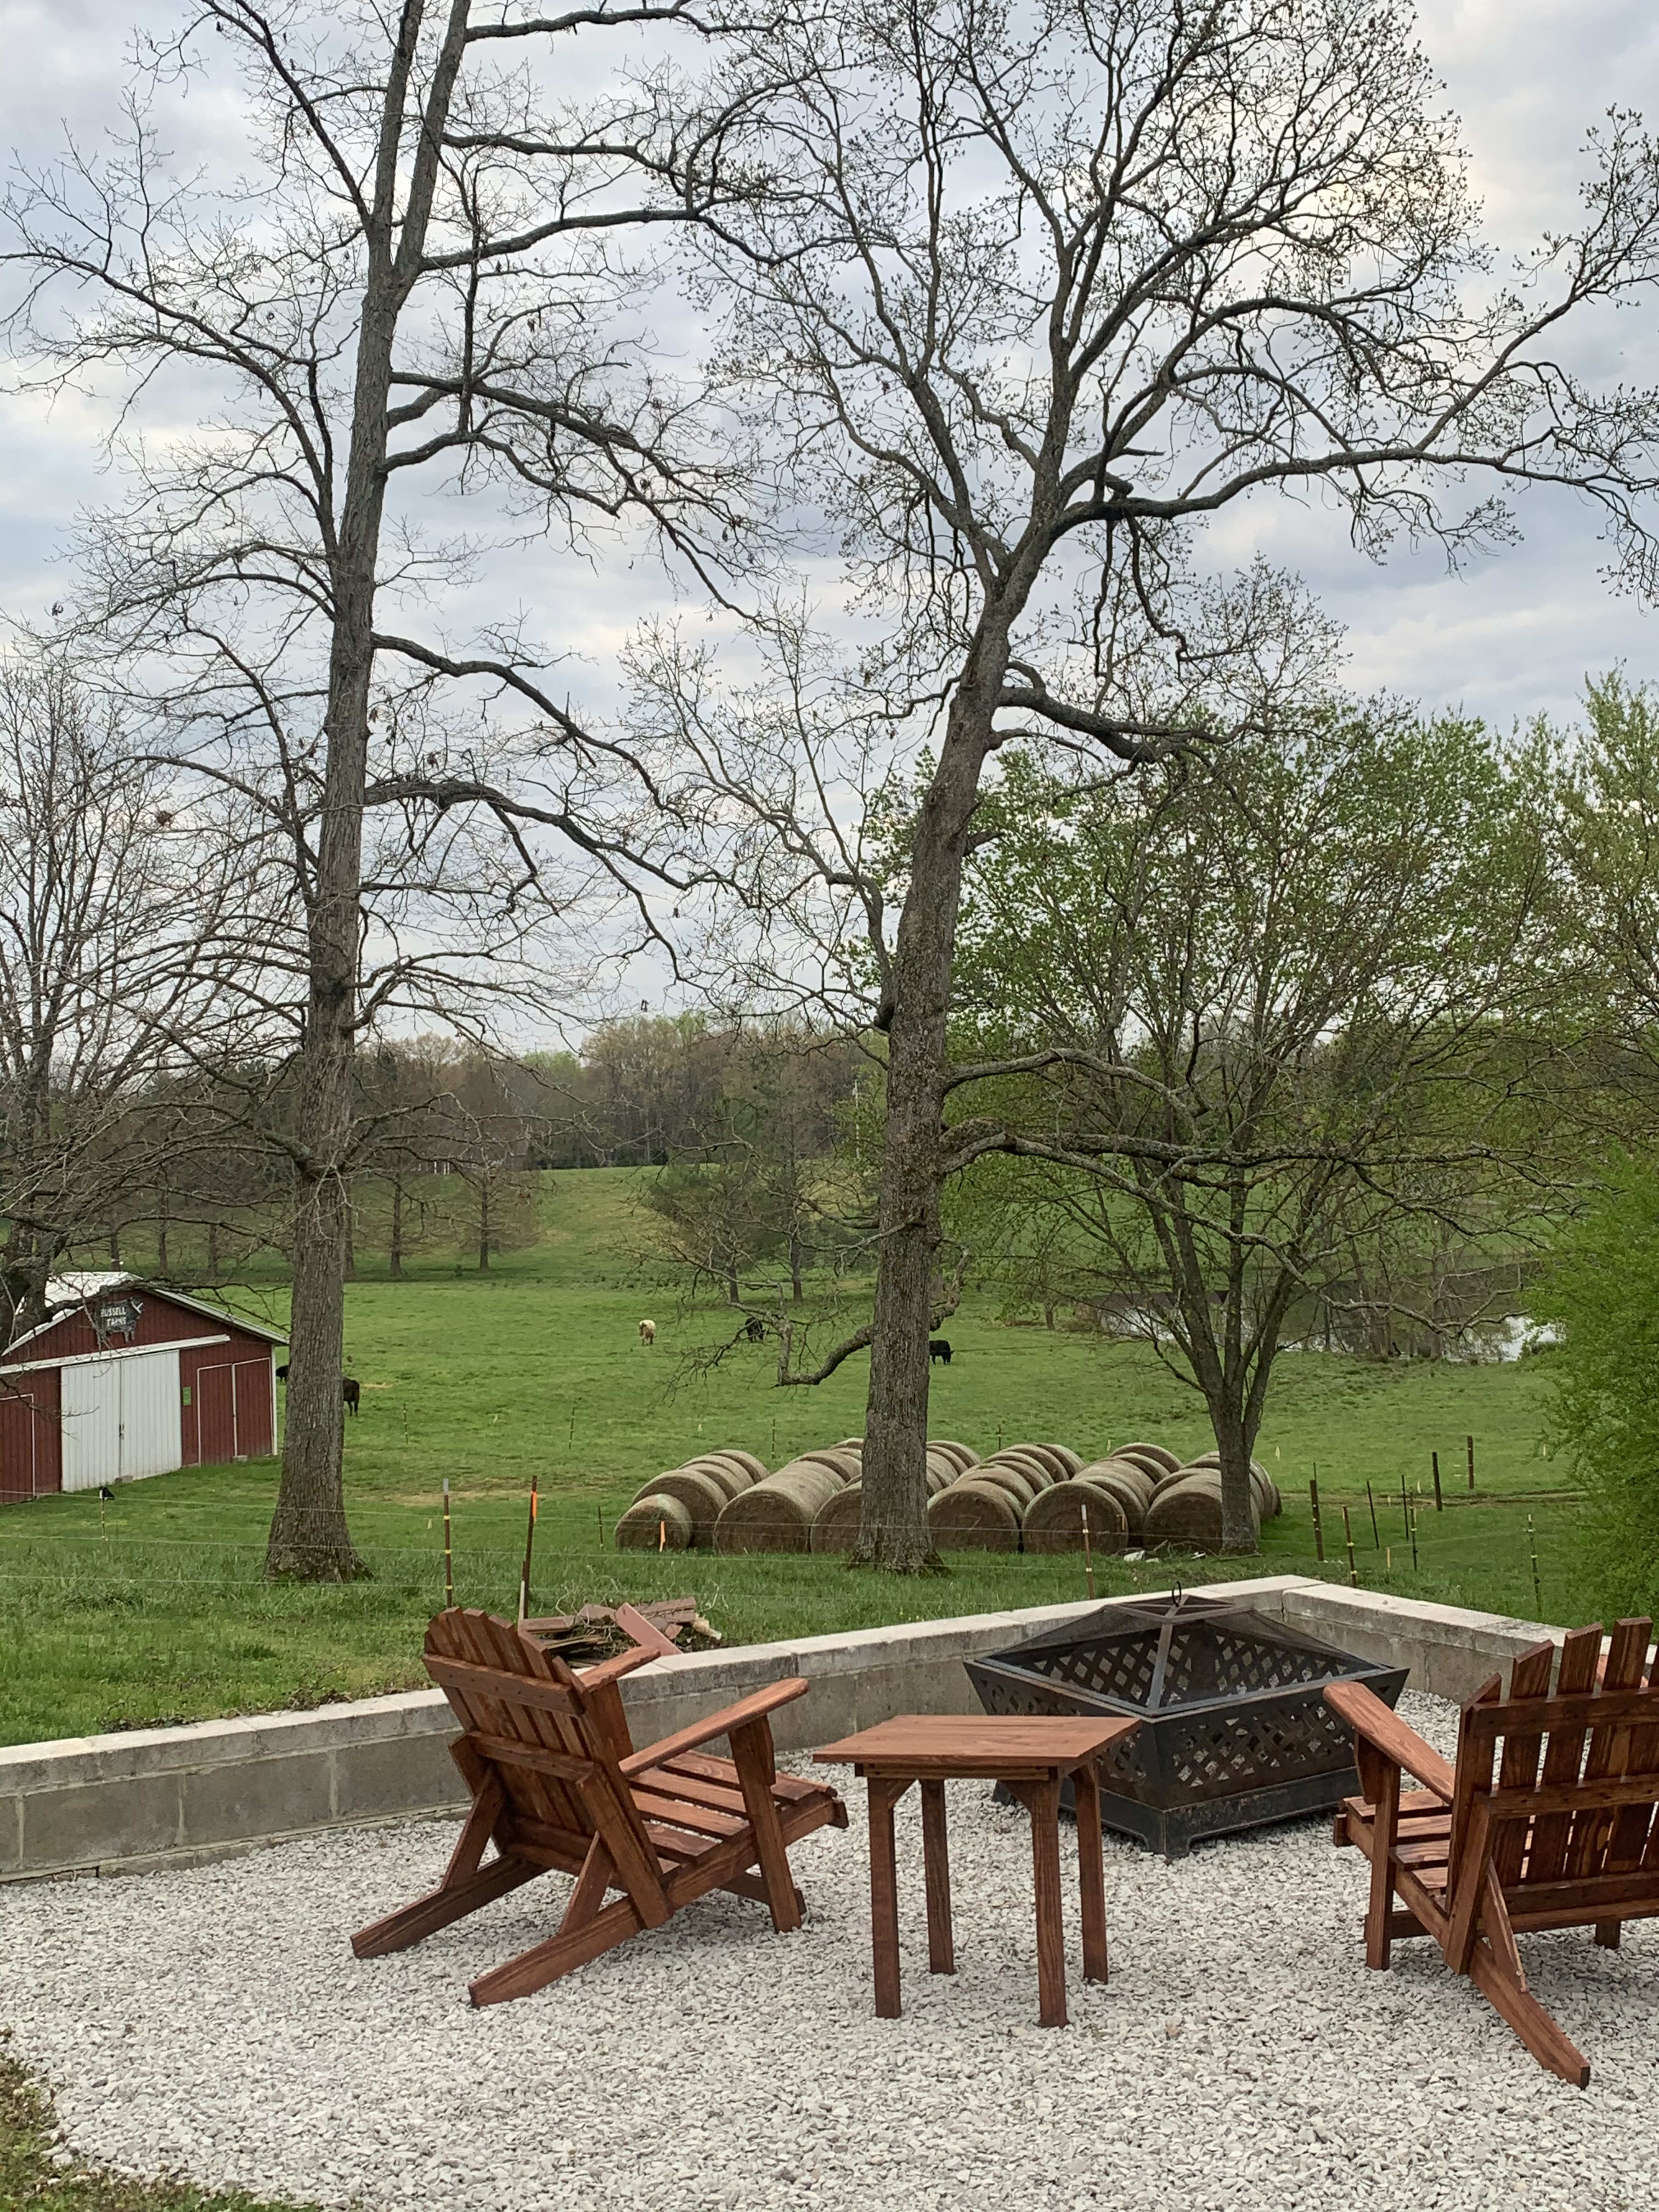 Enjoy the Fire flies or a morning cup of coffee overlooking beautiful farm land a Burgess Falls road